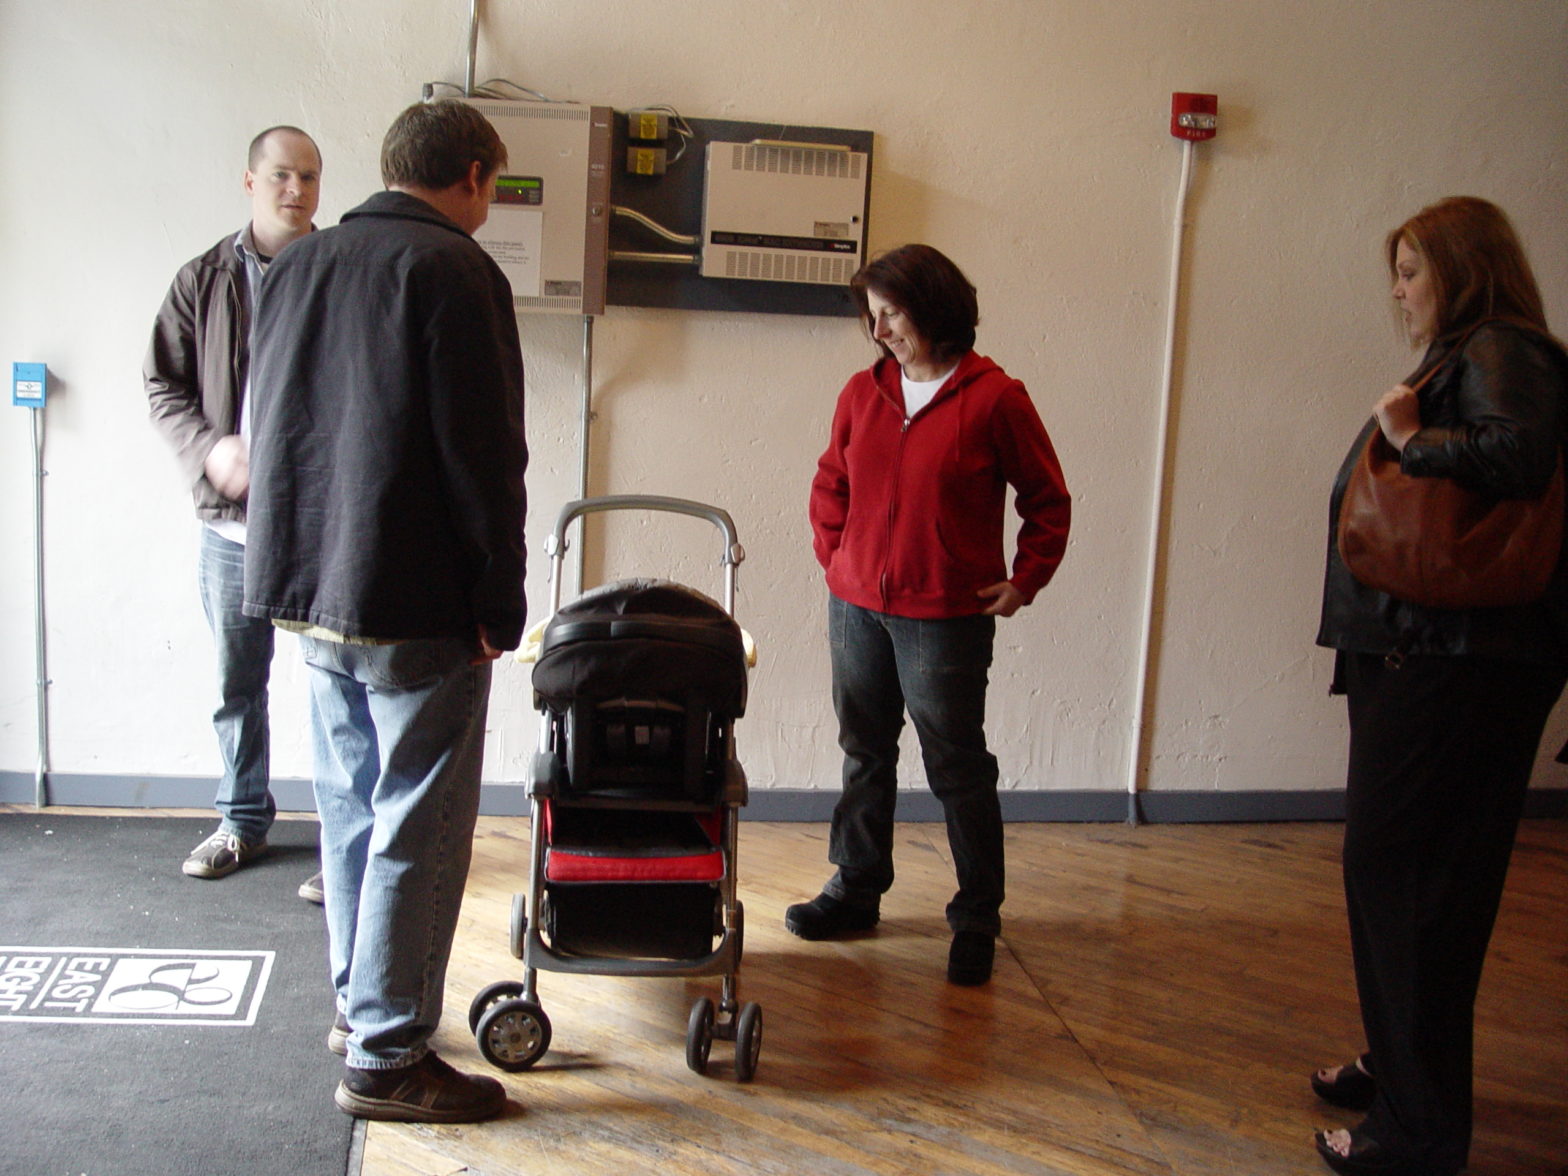 Folks stand around a baby in a stroller